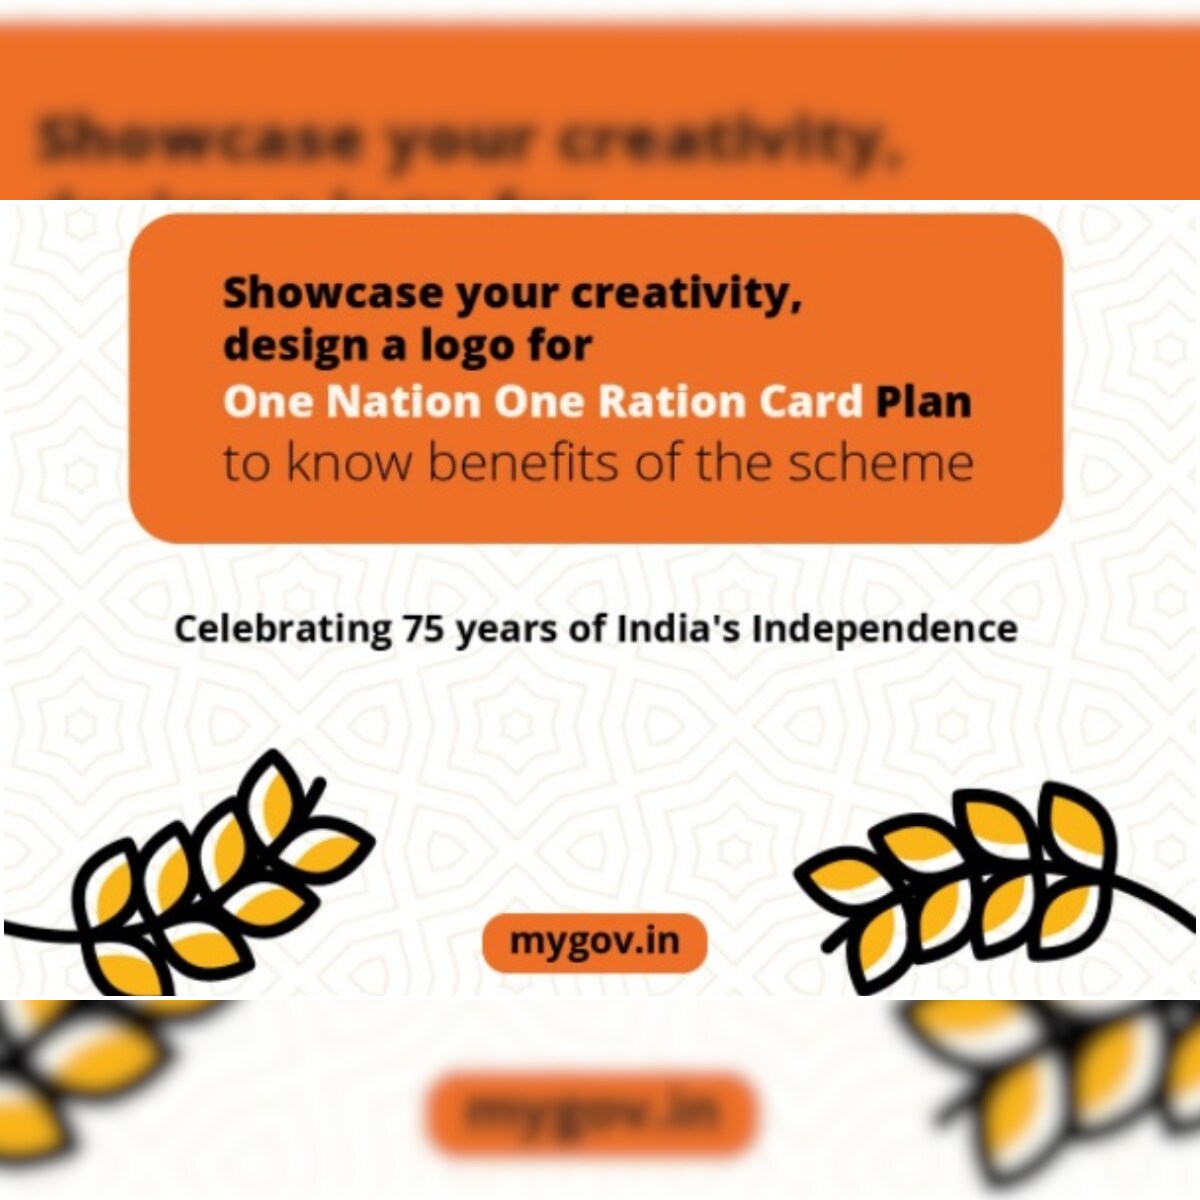 Win Rs 50 000 By Designing Logos For One Nation One Ration Card Here S Step By Step Guide To Register